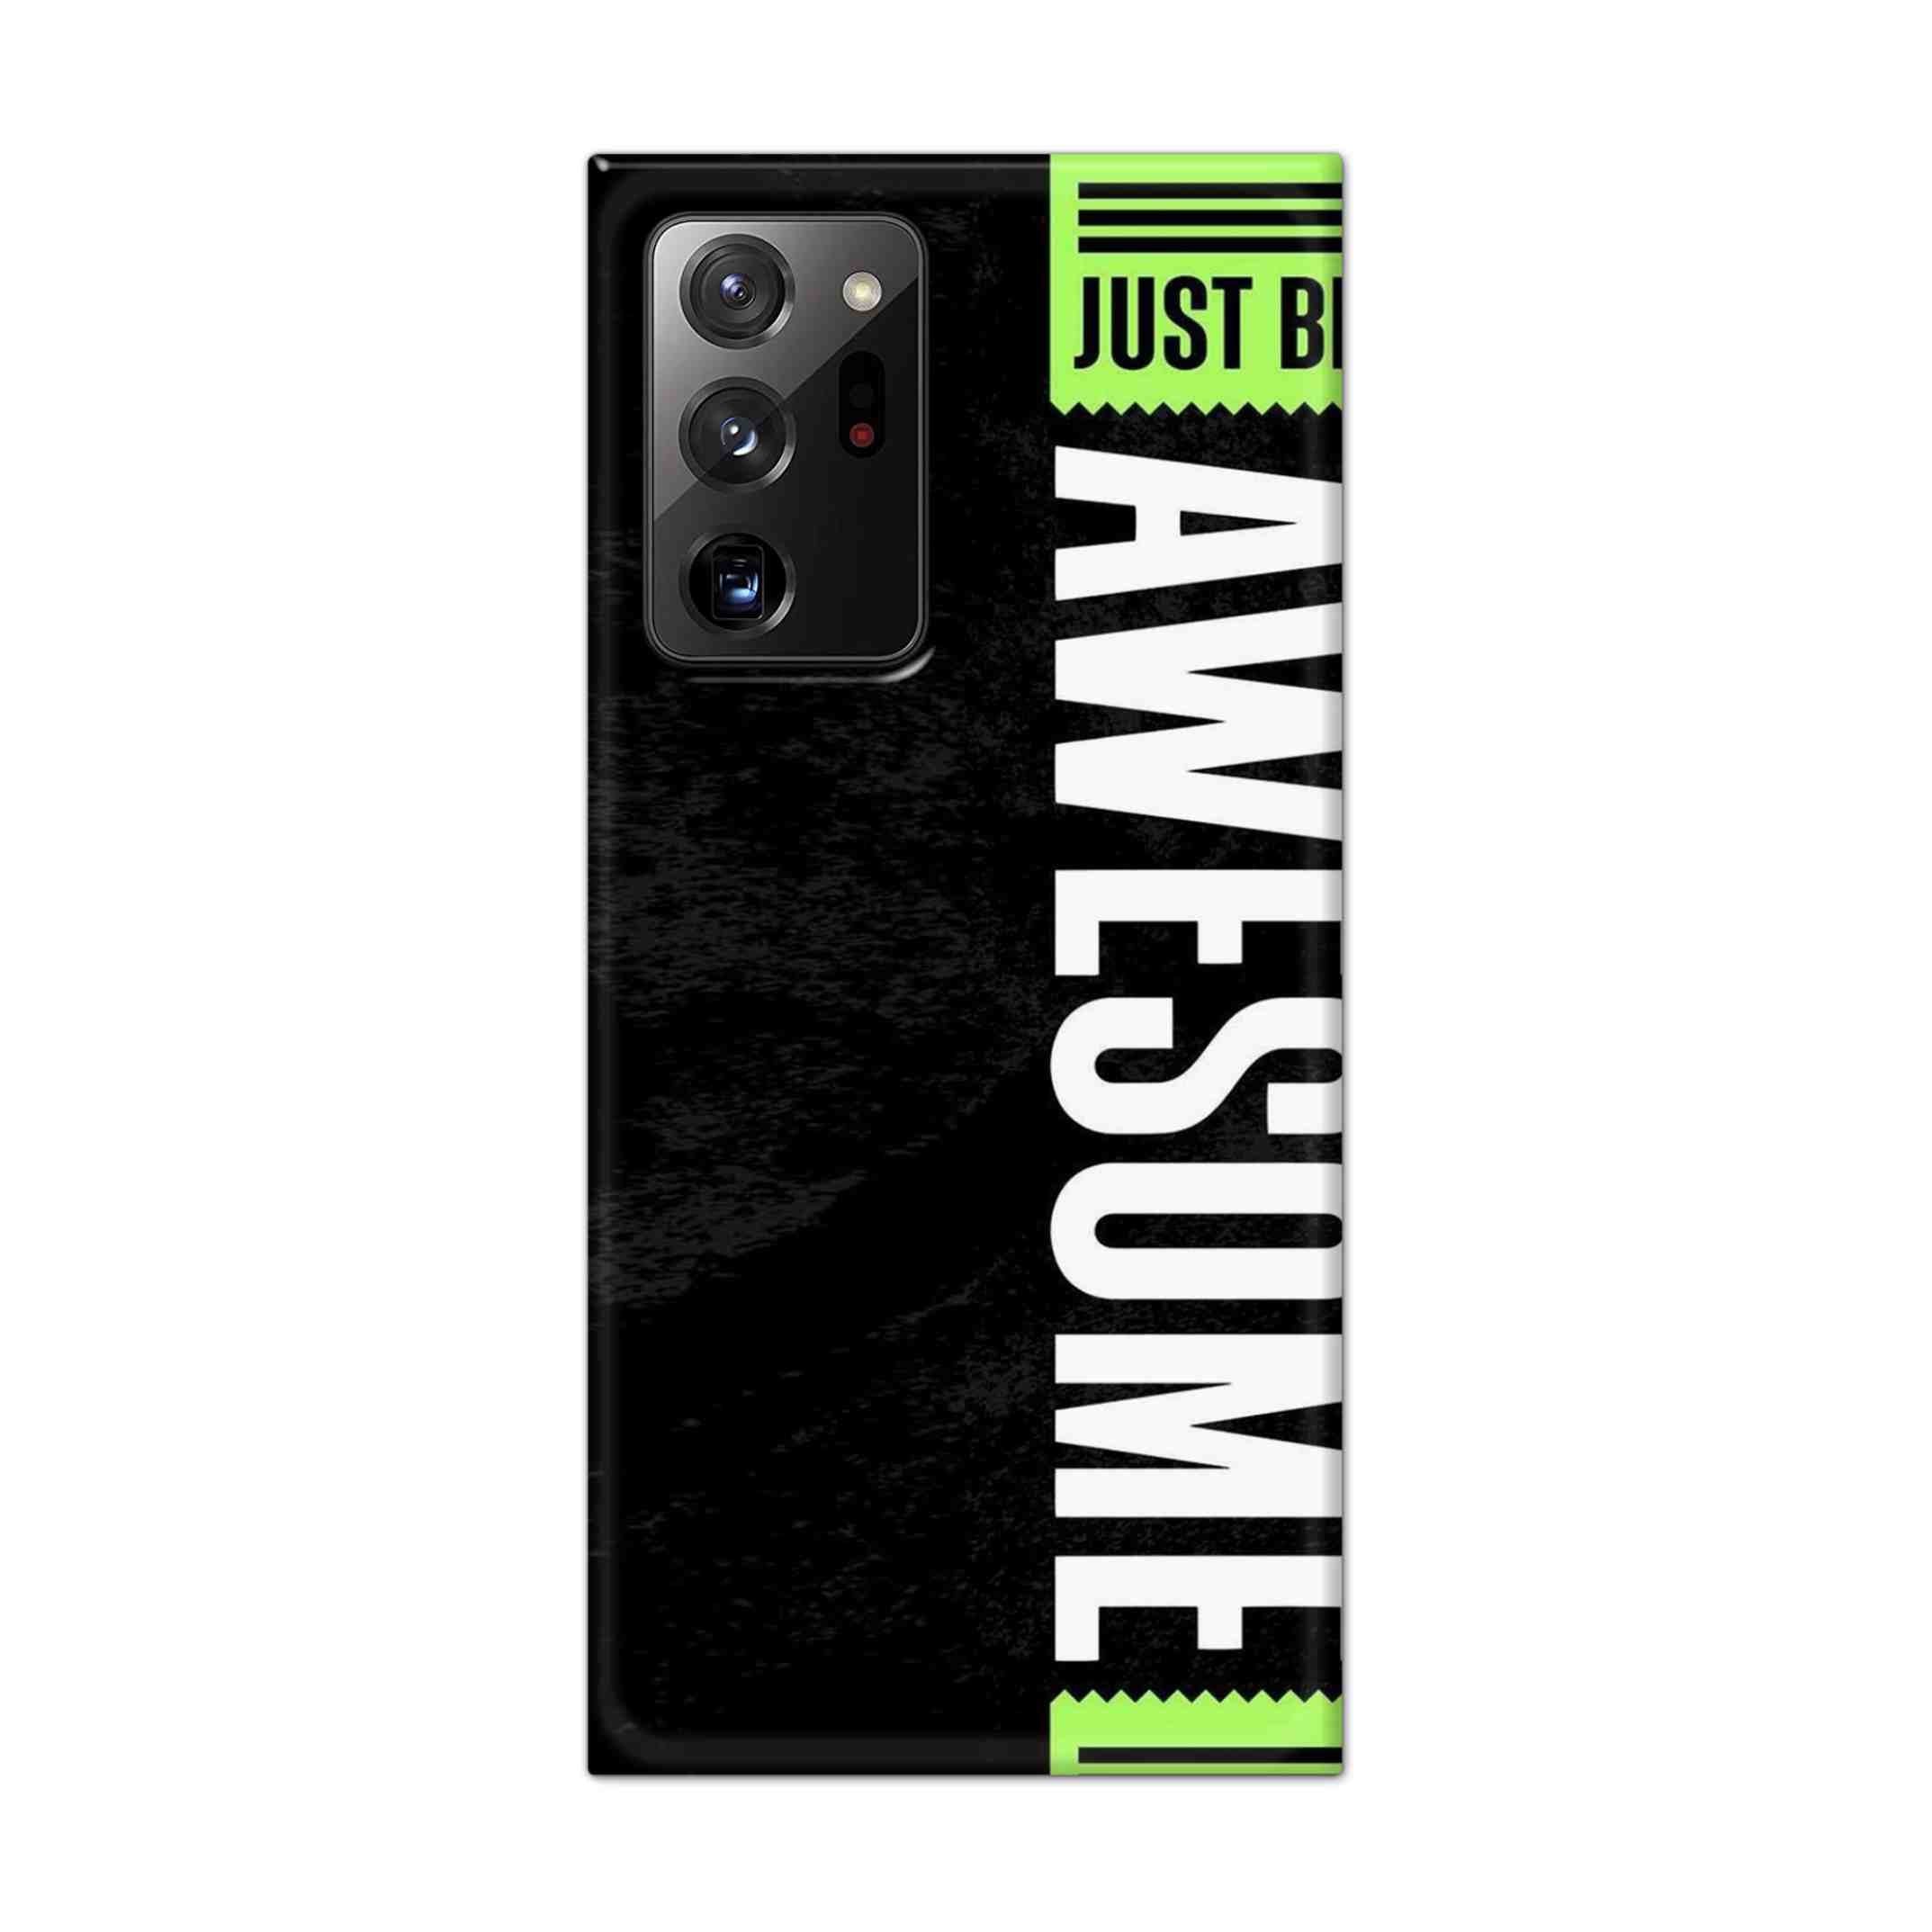 Buy Awesome Street Hard Back Mobile Phone Case Cover For Samsung Galaxy Note 20 Ultra Online